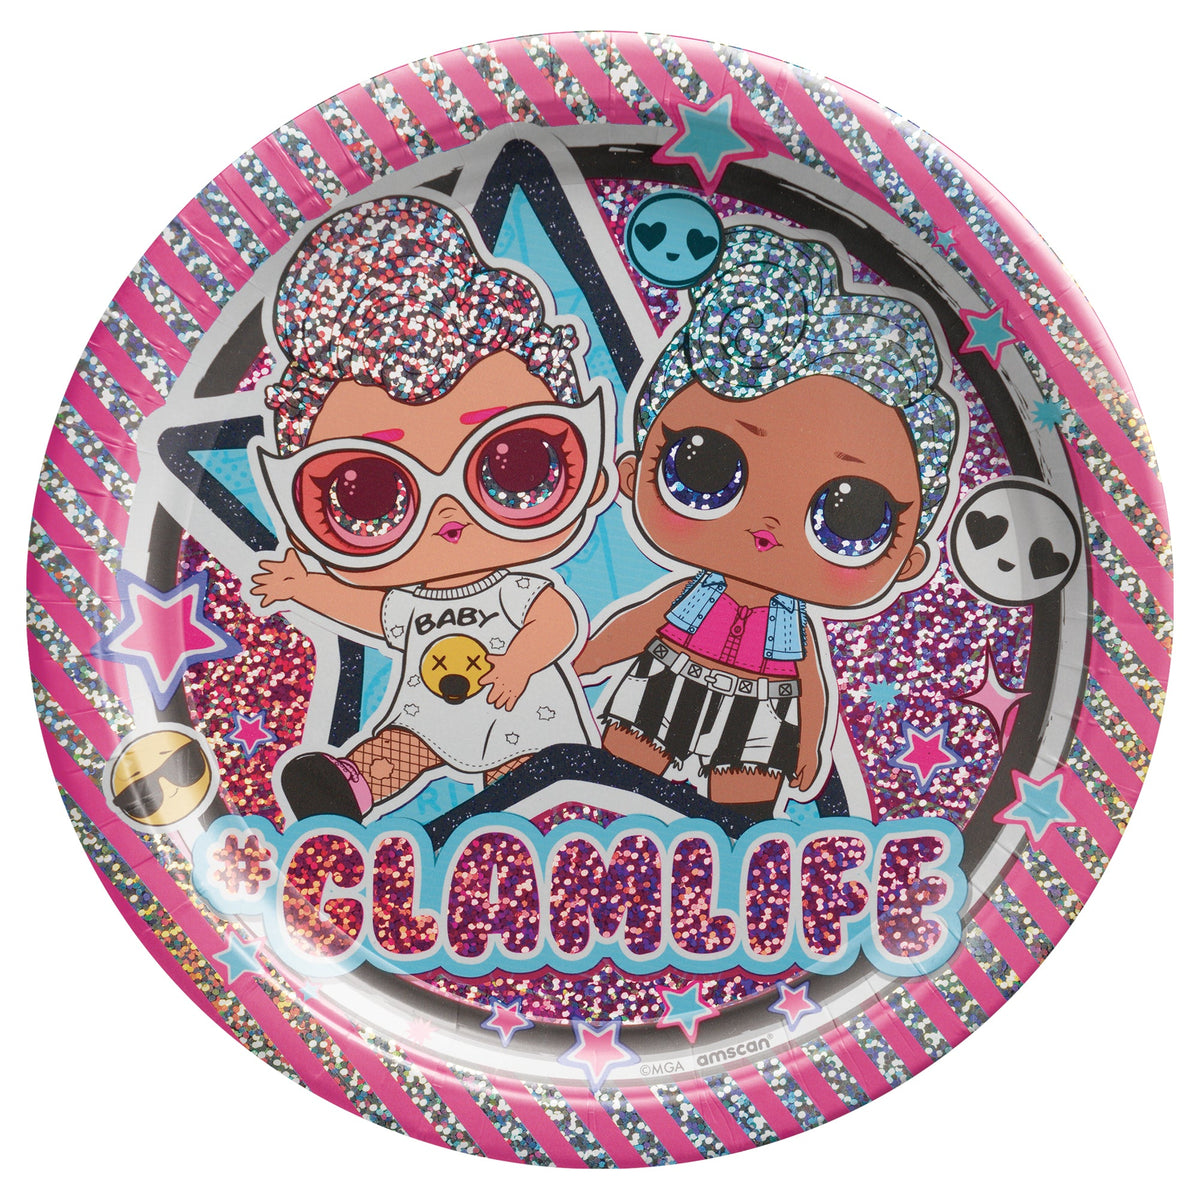 LOL Surprise, Together 4 Eva! 7" Prismatic Round Plates Package of 8